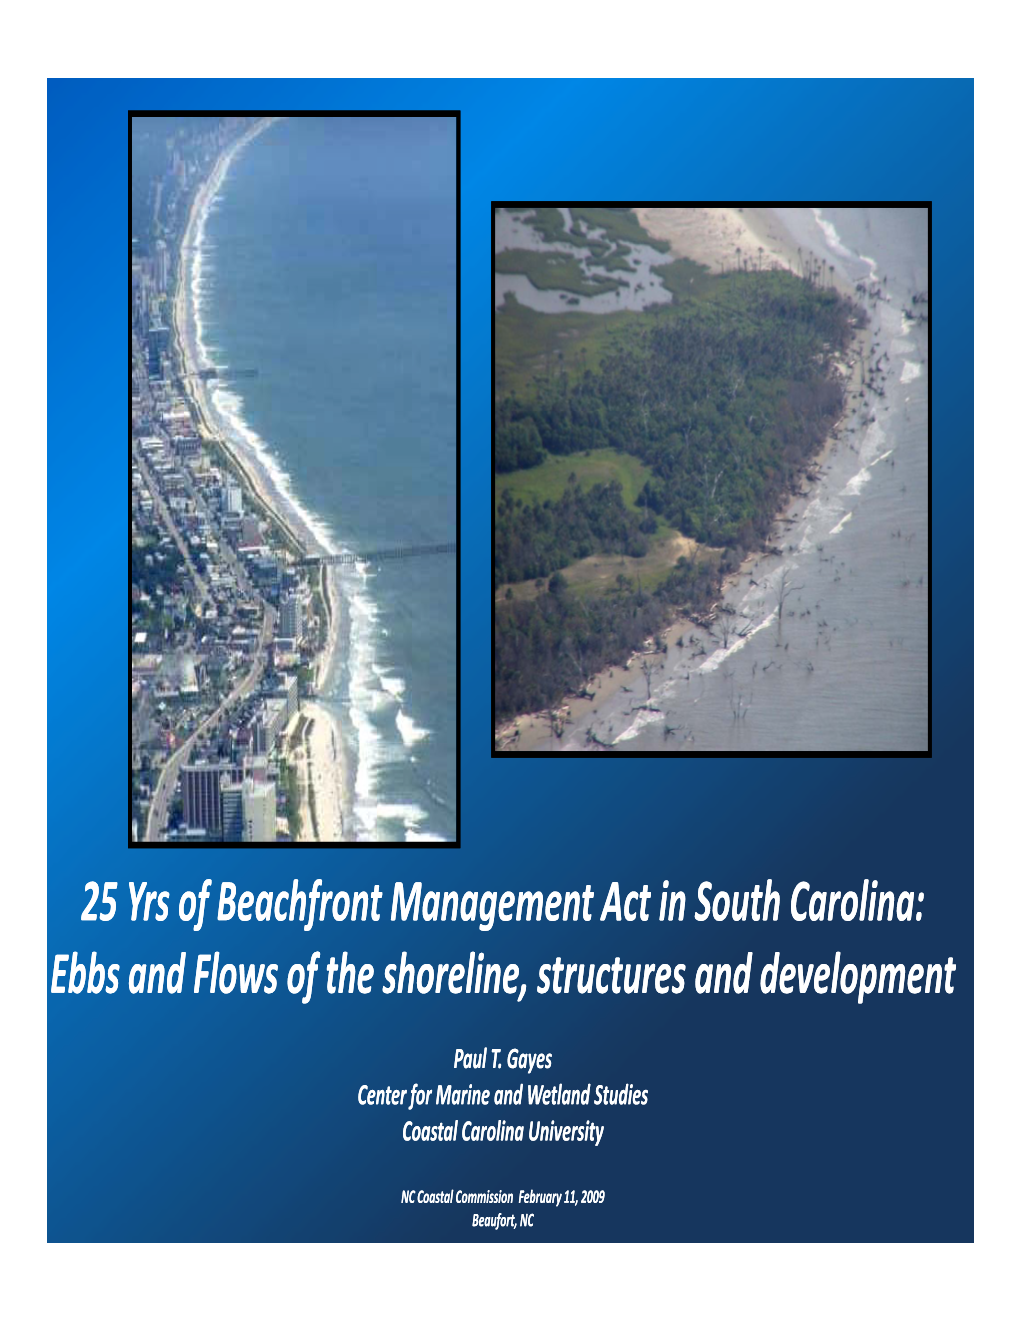 25 Yrs of Beachfront Management Act in South Carolina: Ebbs and Flows of the Shoreline, Structures and Development